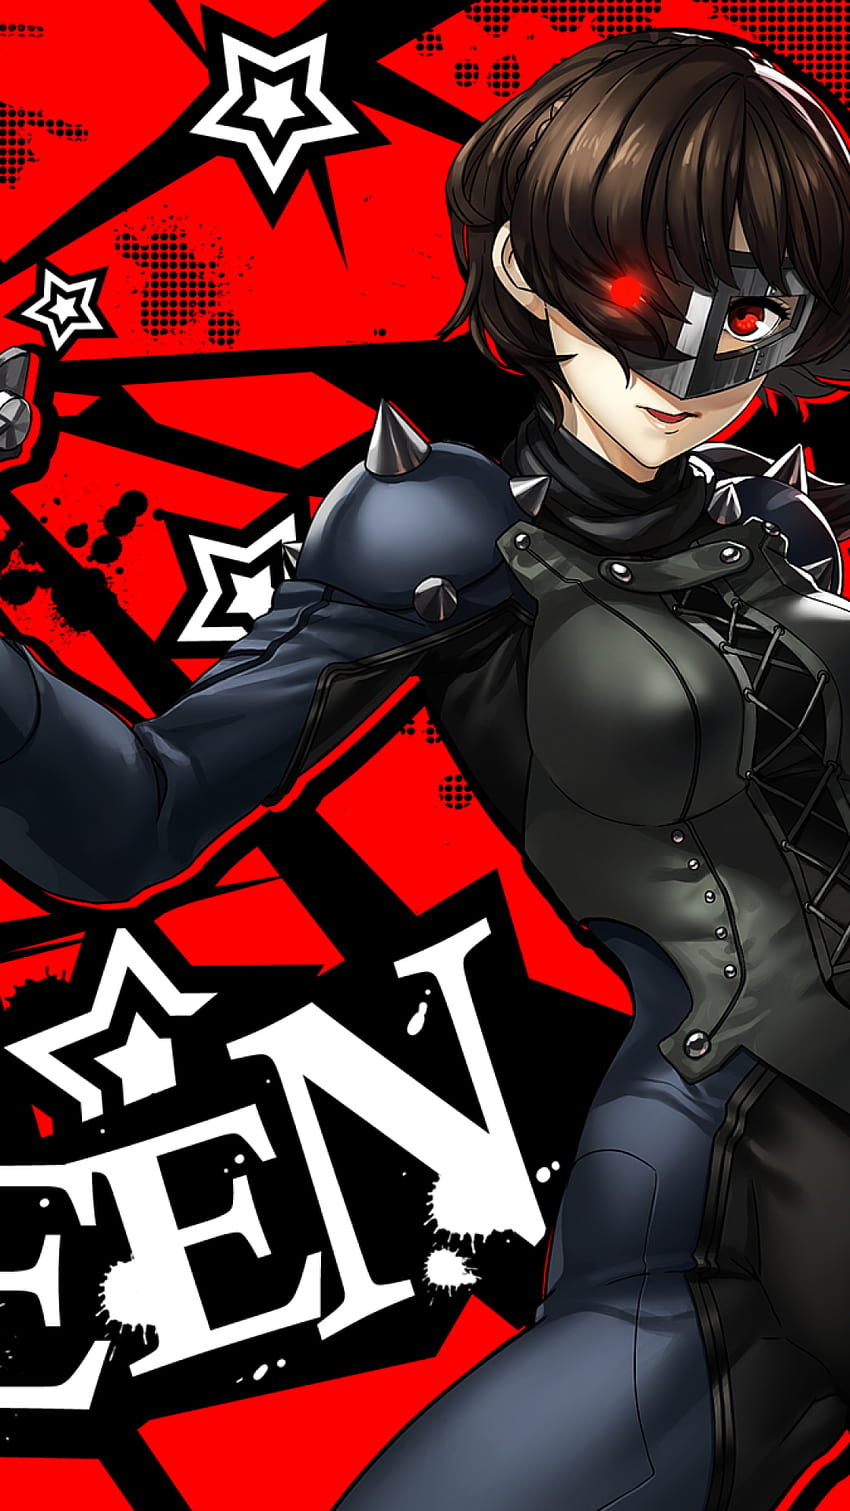 1080x1920 Persona 5, Niijima Makoto, Queen, Bodysuit, Mask, Red Eyes, Anime Style Games for iPhone 8, iPhone 7 Plus, iPhone 6+, Sony Xperia Z, HTC One, makoto niijima iphone HD phone wallpaper